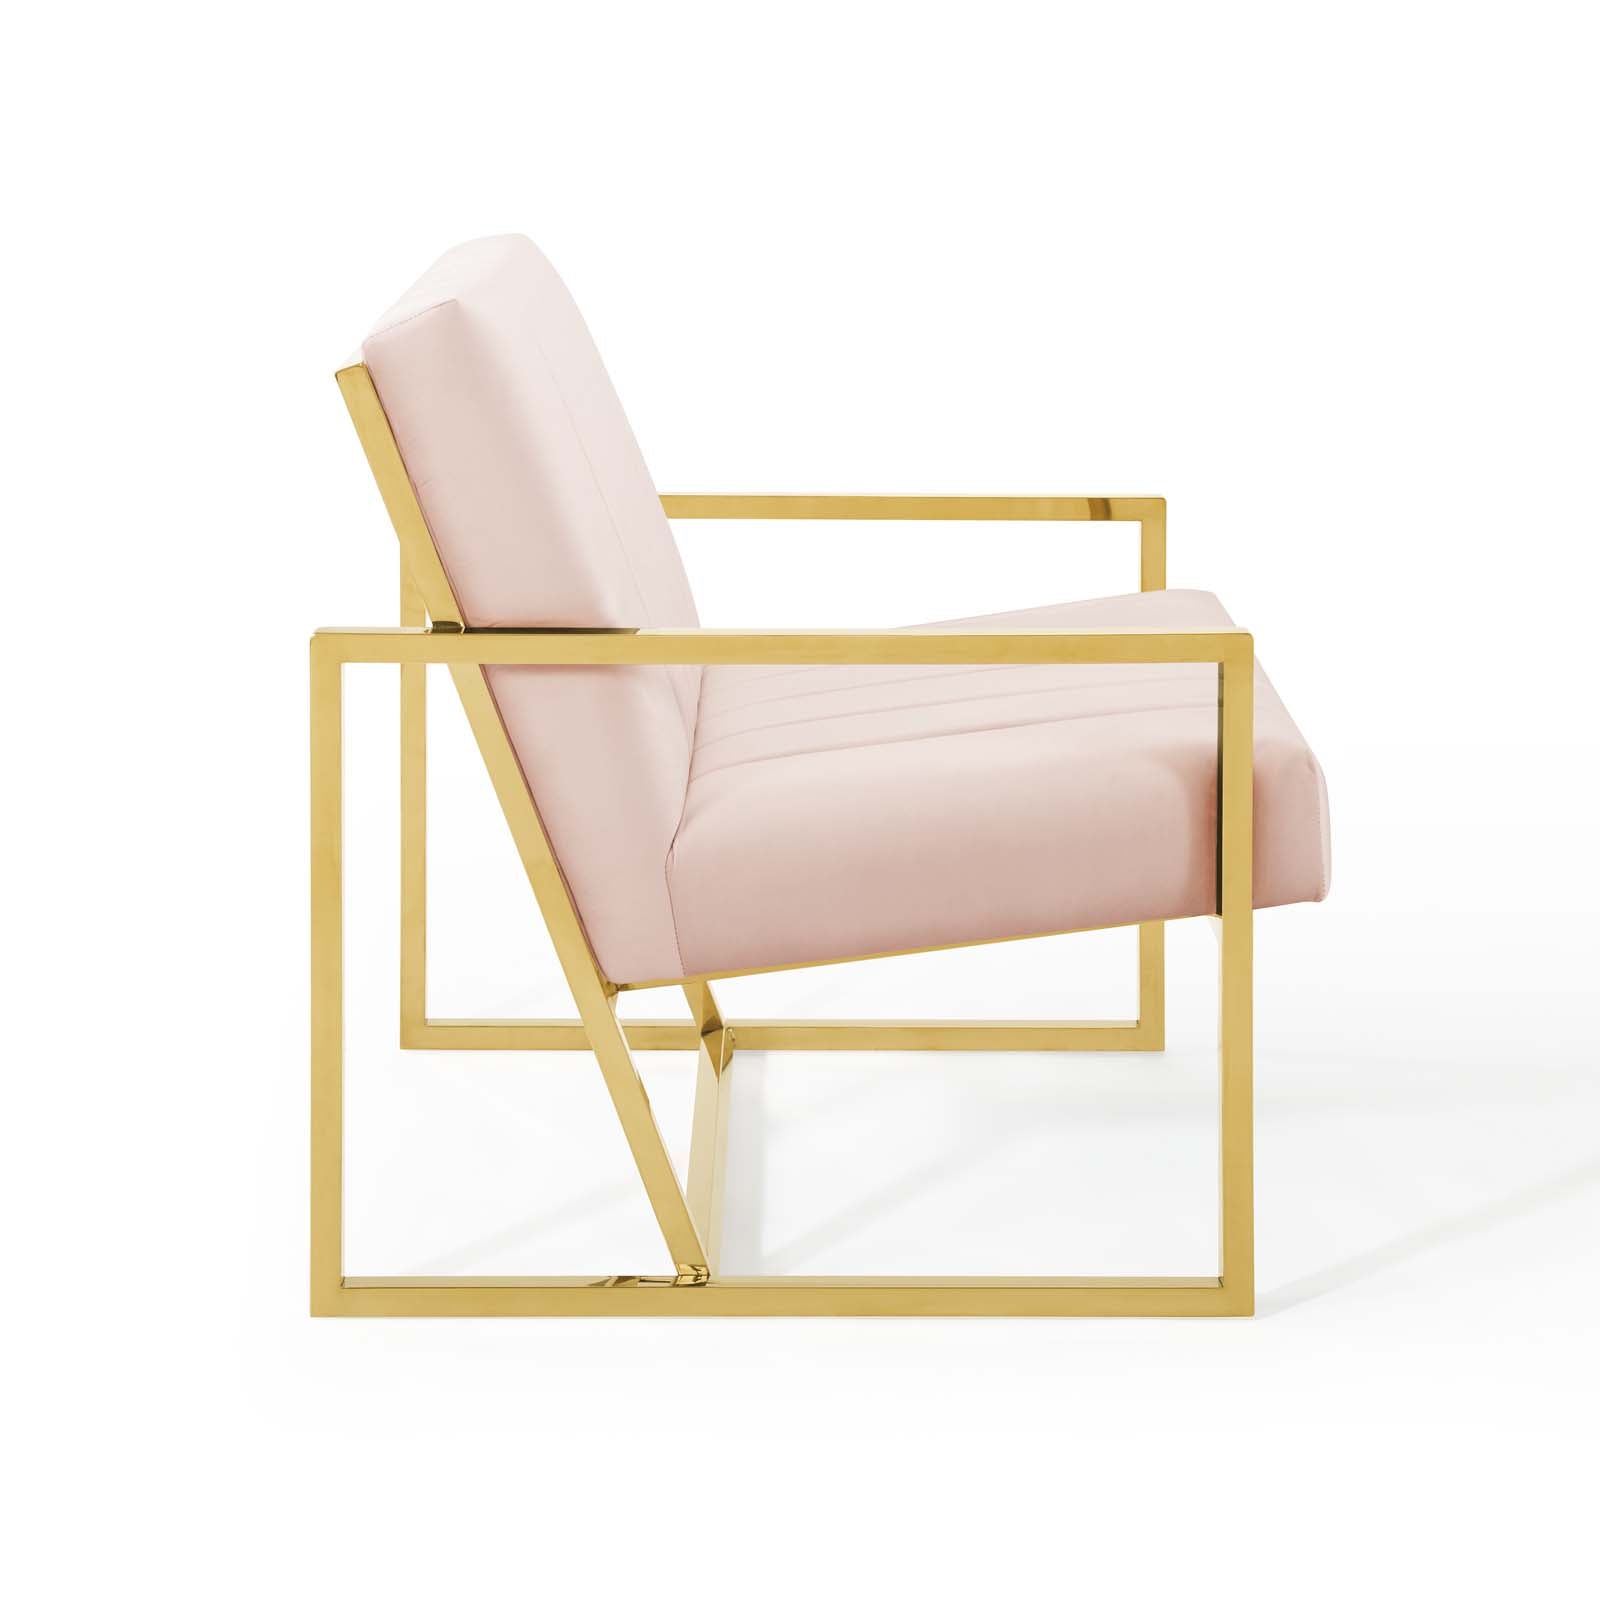 Modway Chairs - Inspire Channel Tufted Performance Velvet Armchair Pink